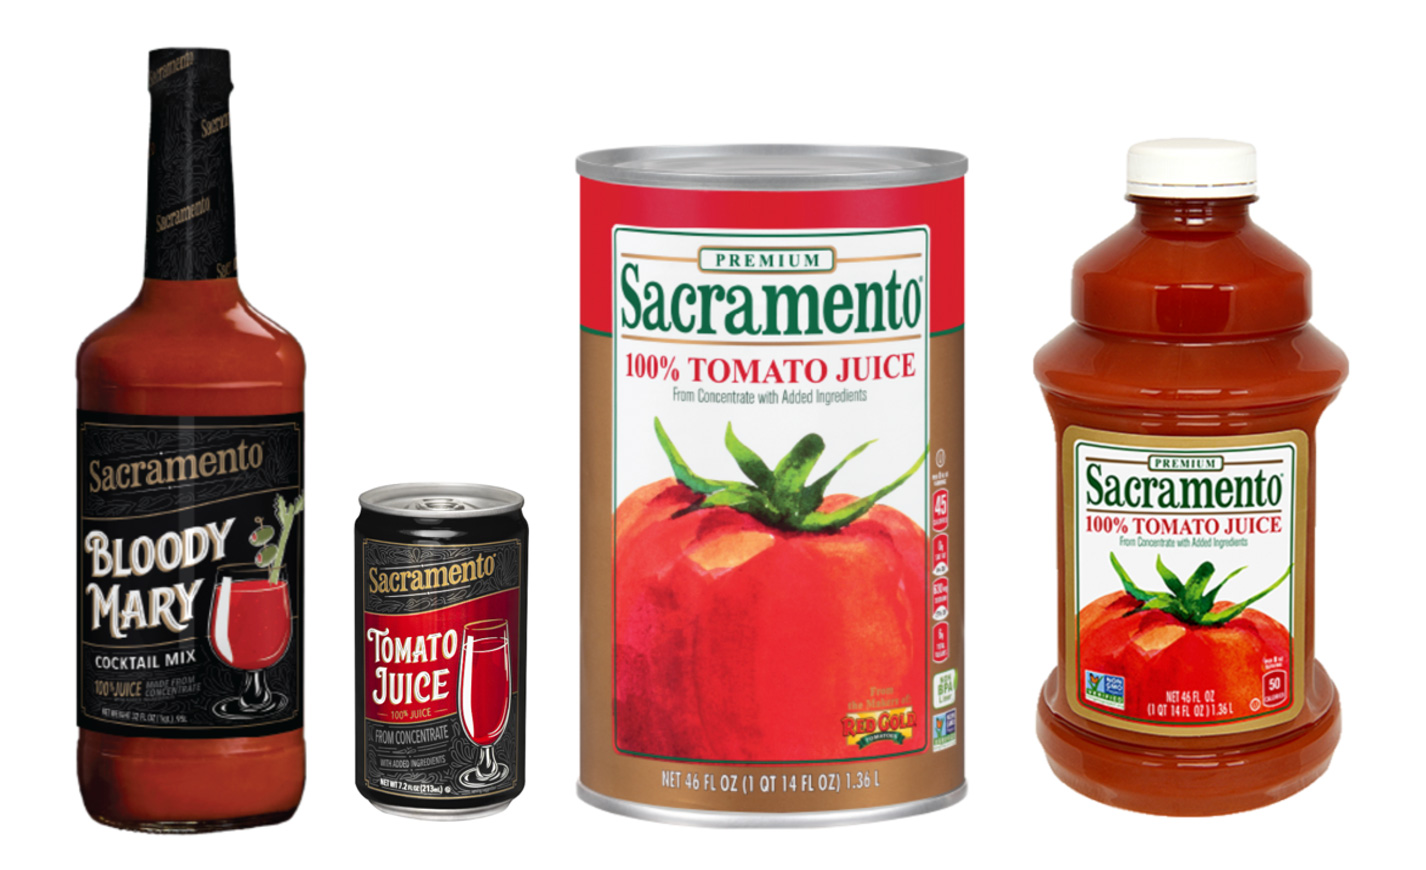 Premium Sacramento Tomato Juice and Bloody Mary Mix are the best way to serve tomato-based cocktails or mocktails.